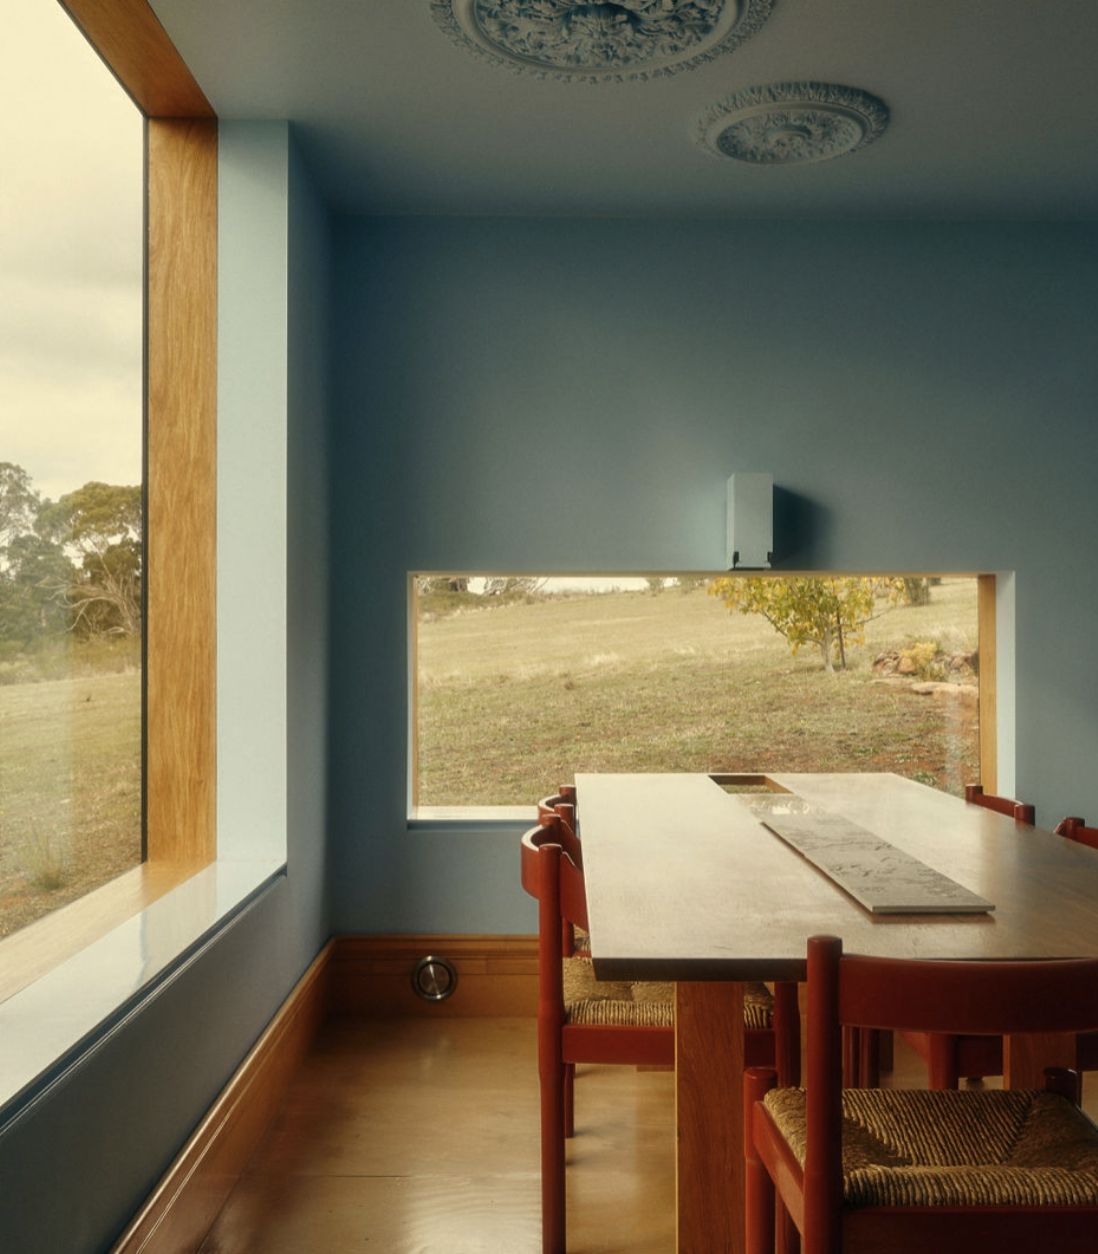 Corner Interior of Daylesford Longhouse with blue walls, large windows and wooden dining table